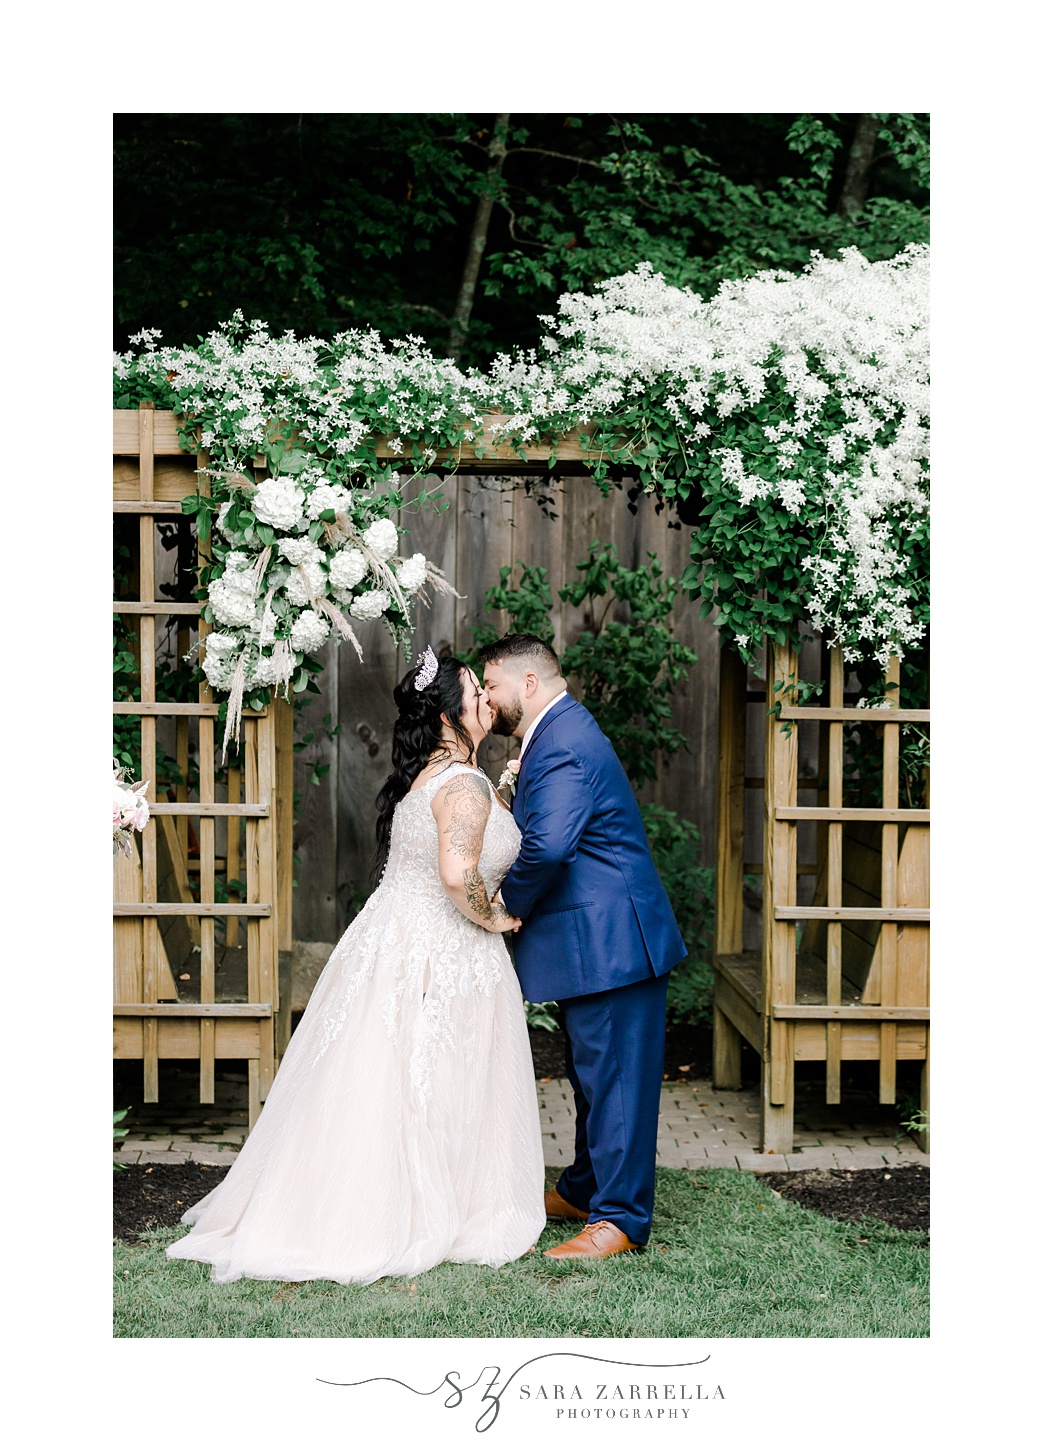 newlyweds kiss under wooden arbor with white flowers at Blissful Meadows wedding ceremony